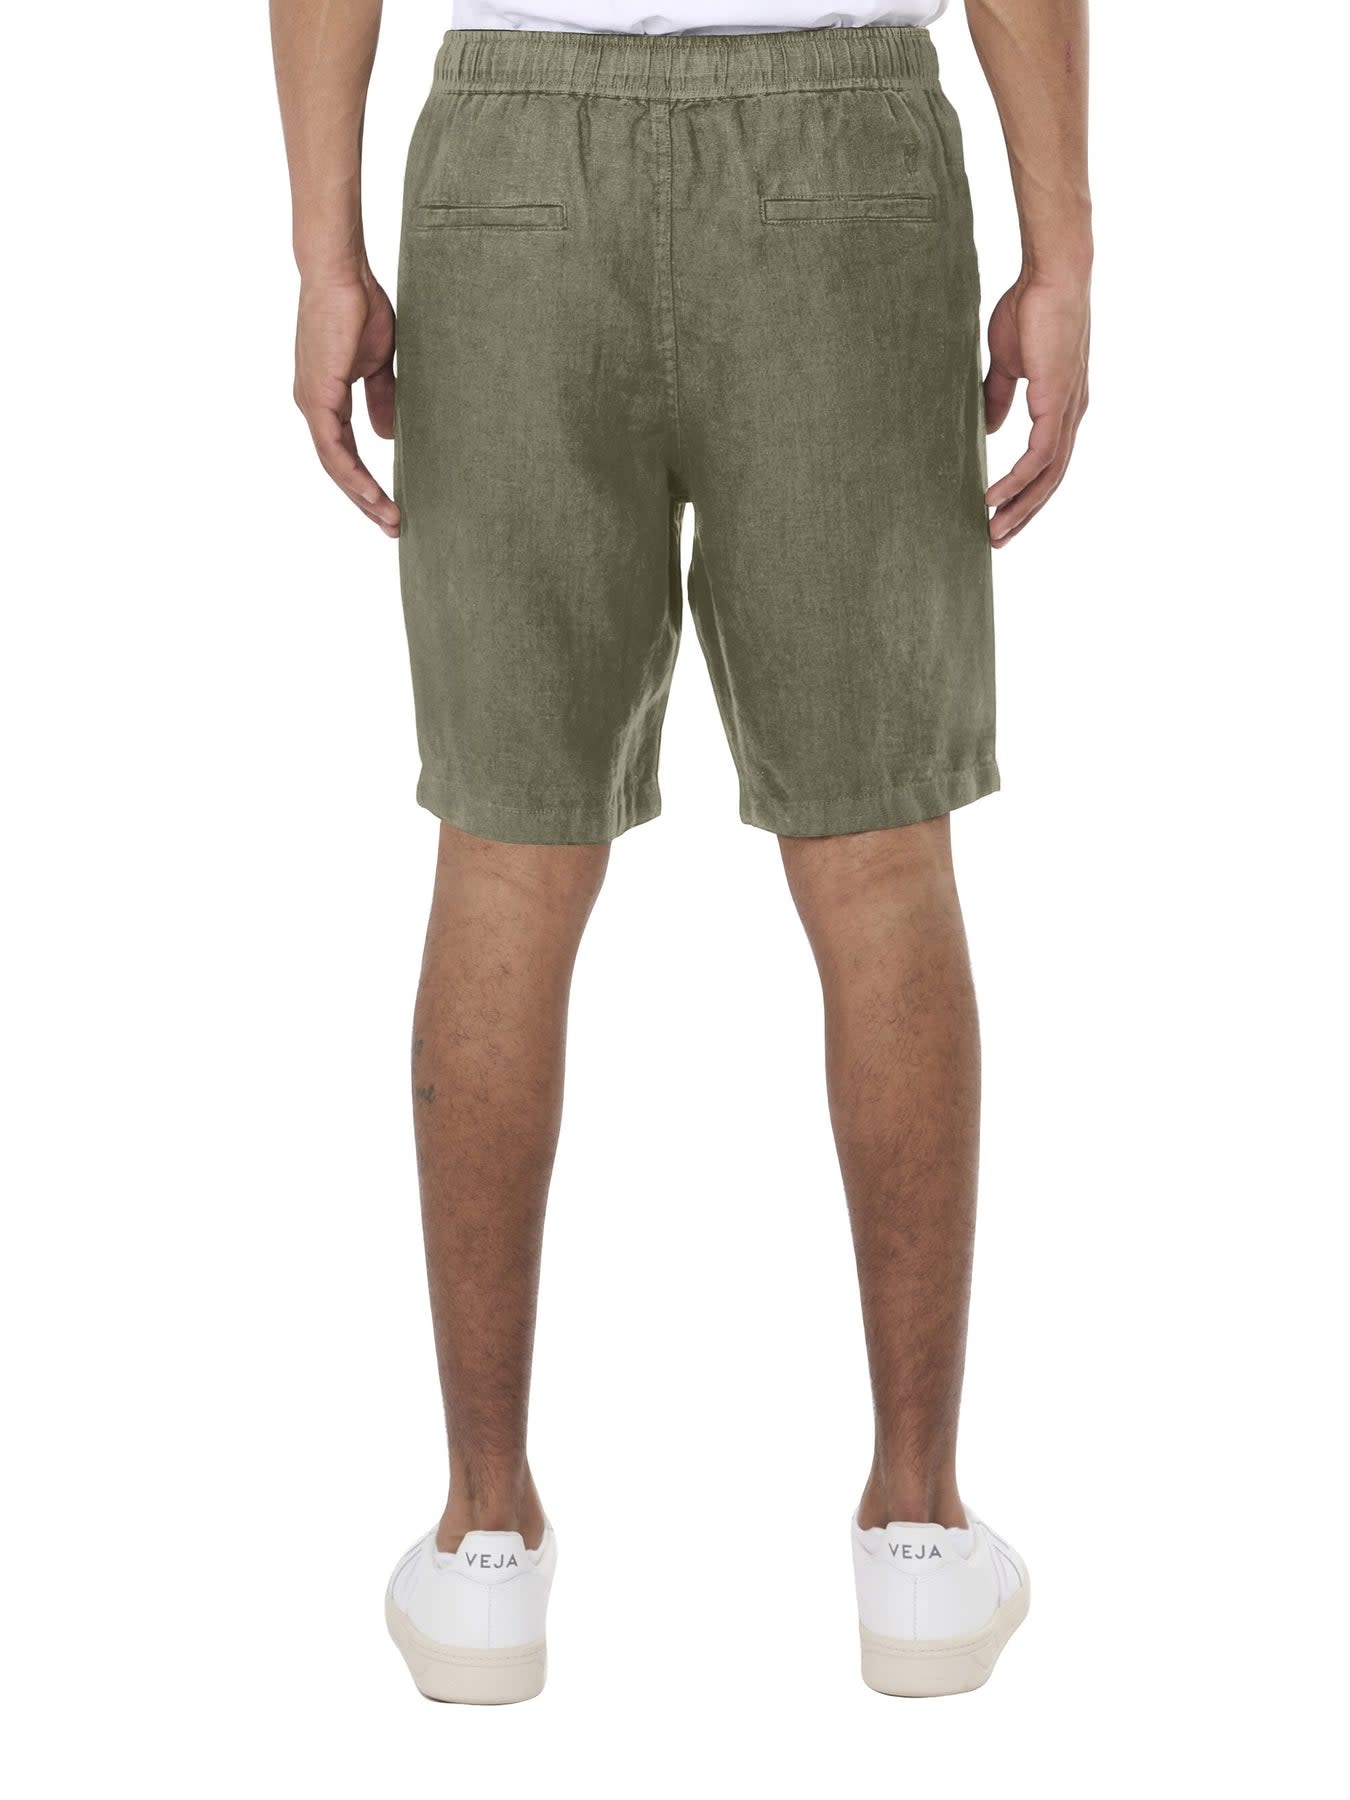 KnowledgeCotton Apparel KnowledgeCotton, Fig Loose Shorts, burned olive, L